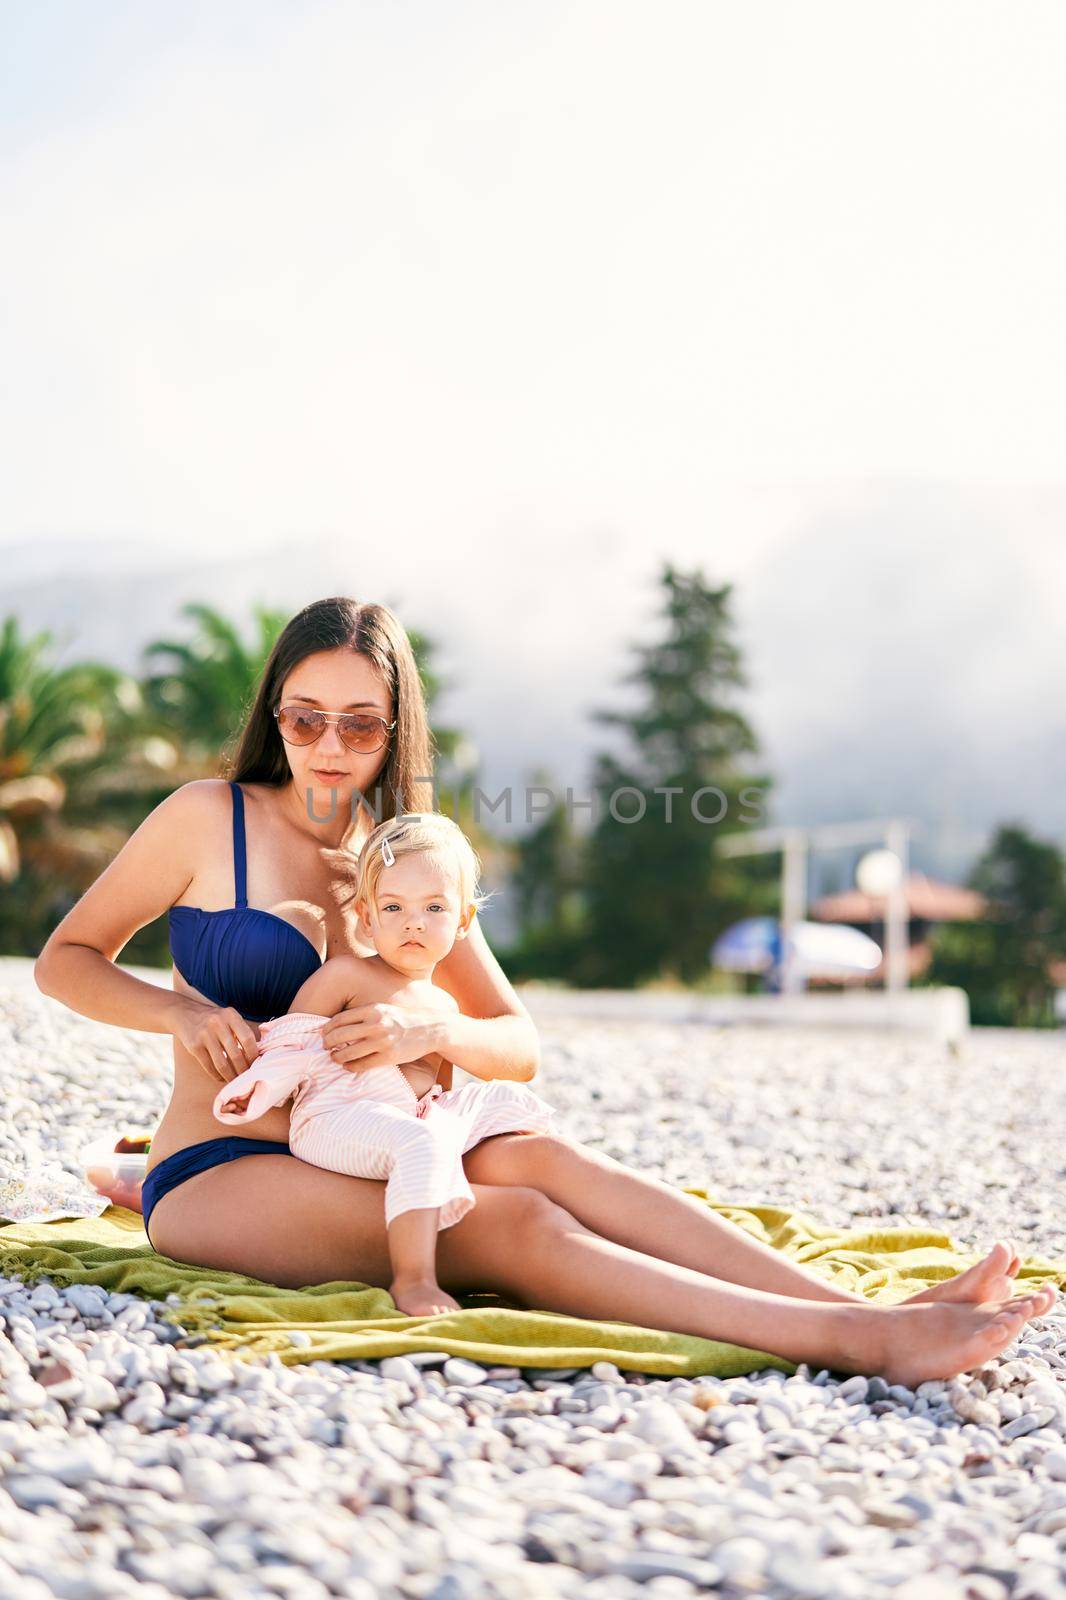 Mom in a bathing suit puts on a little girl a jumpsuit on the beach by Nadtochiy